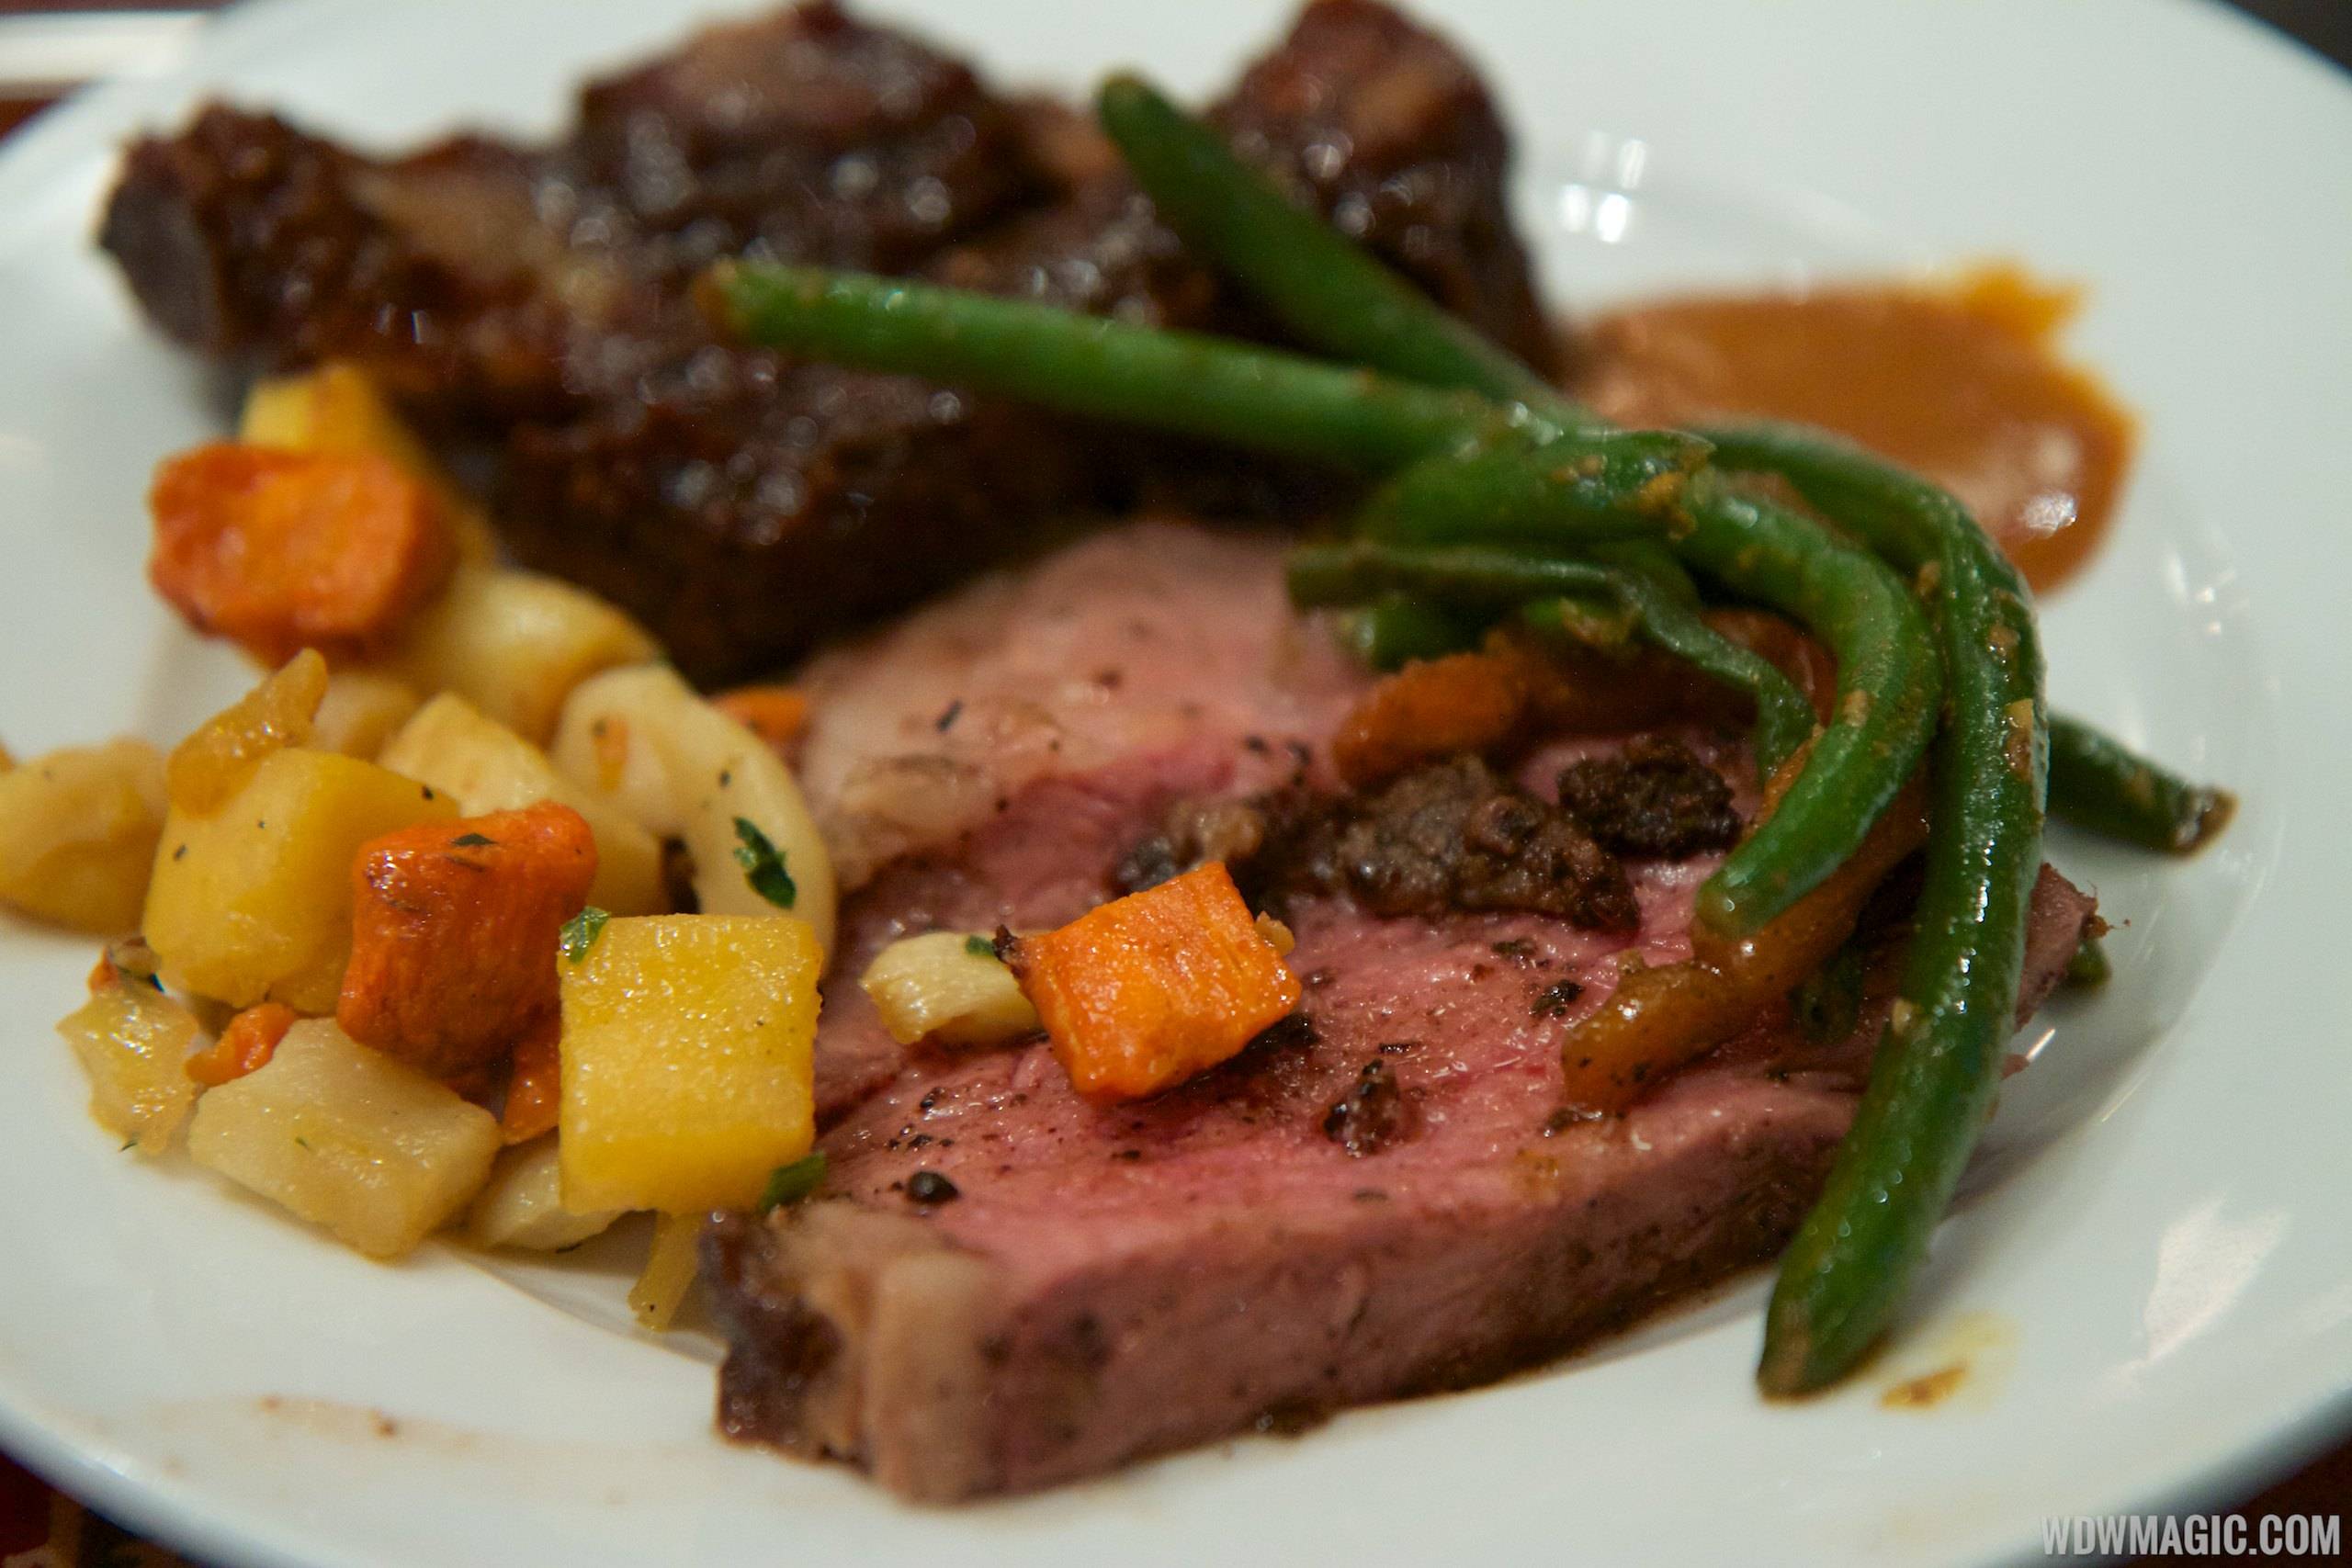 Boma Dinner buffet plate - Strip loin, green beans, root vegetables and ribs